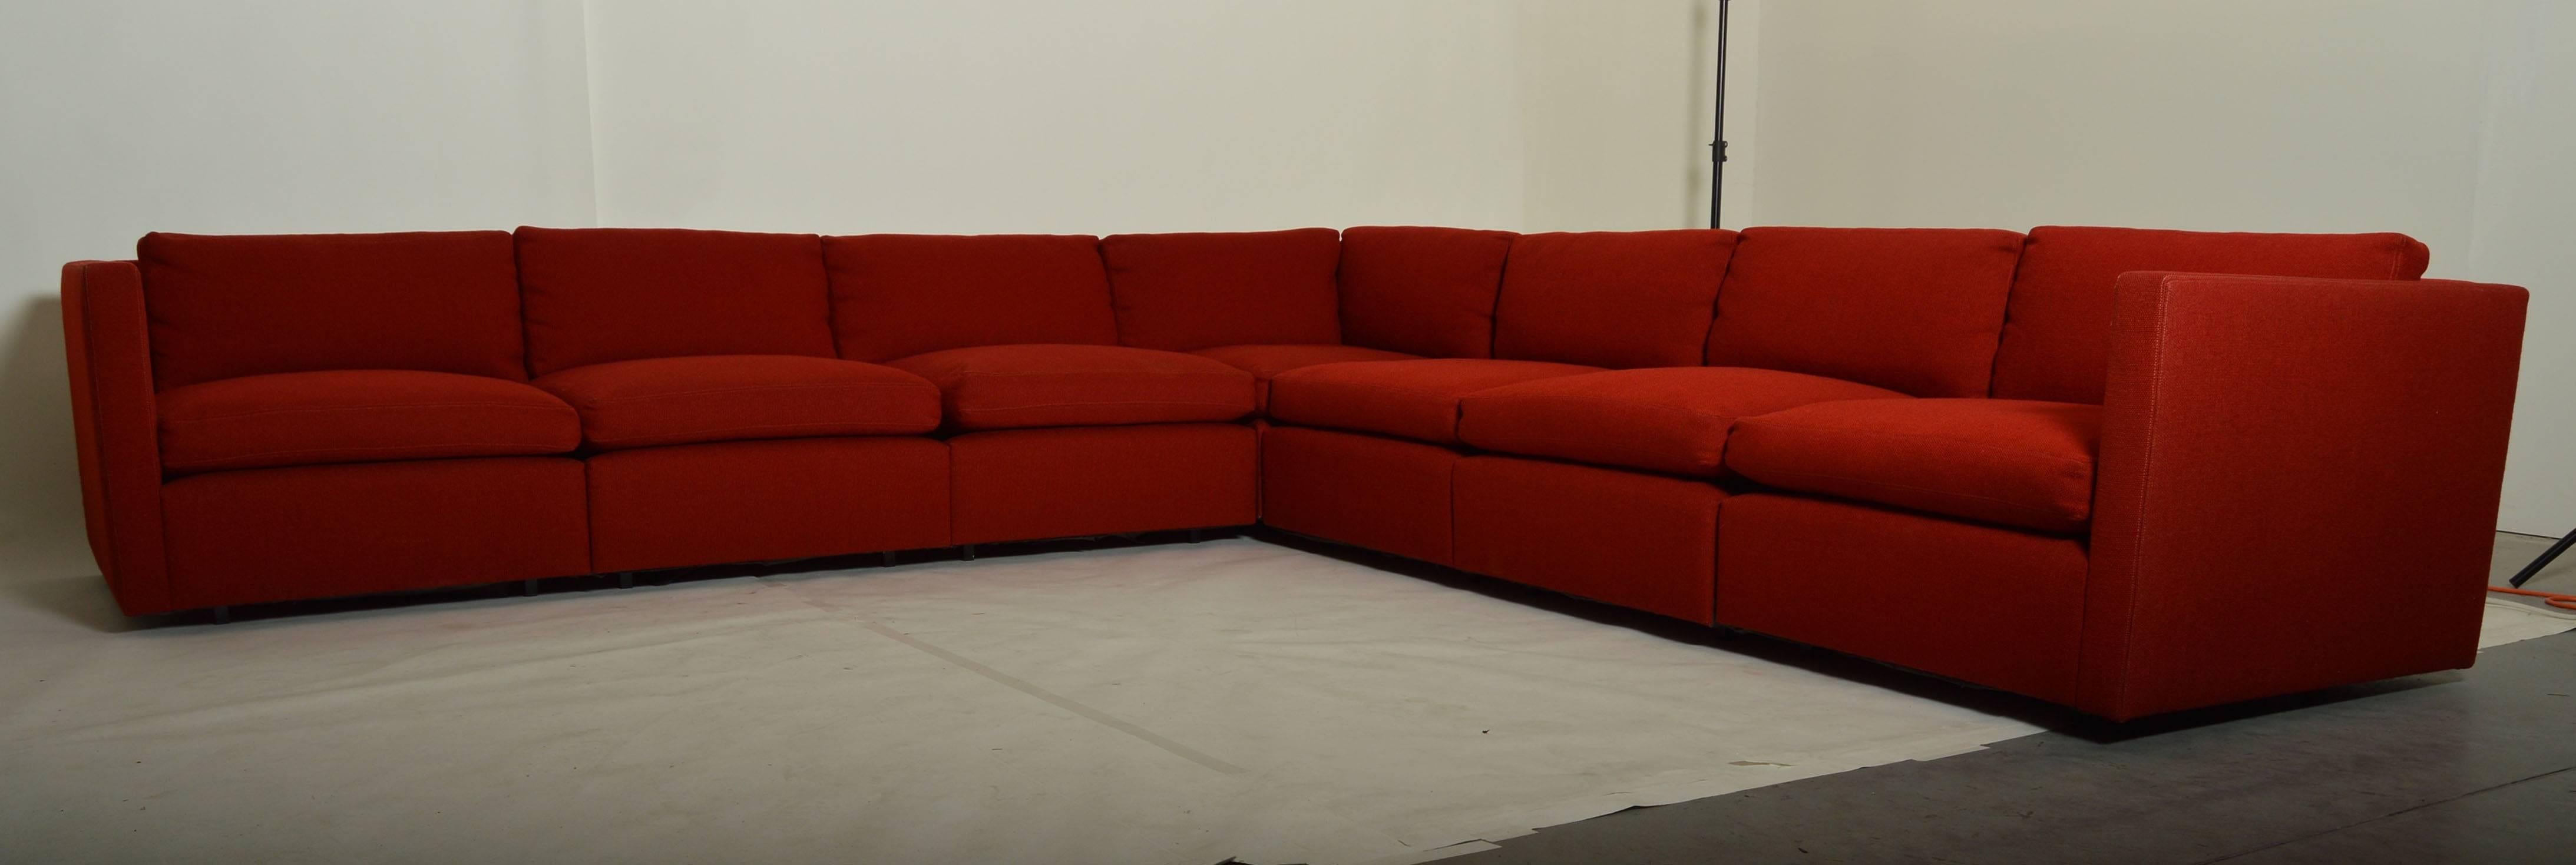 A beautiful modular sectional sofa designed by Charles Pfister for Knoll having lipstick red tweed upholstery. 
Measurements from end to corner each side: 117